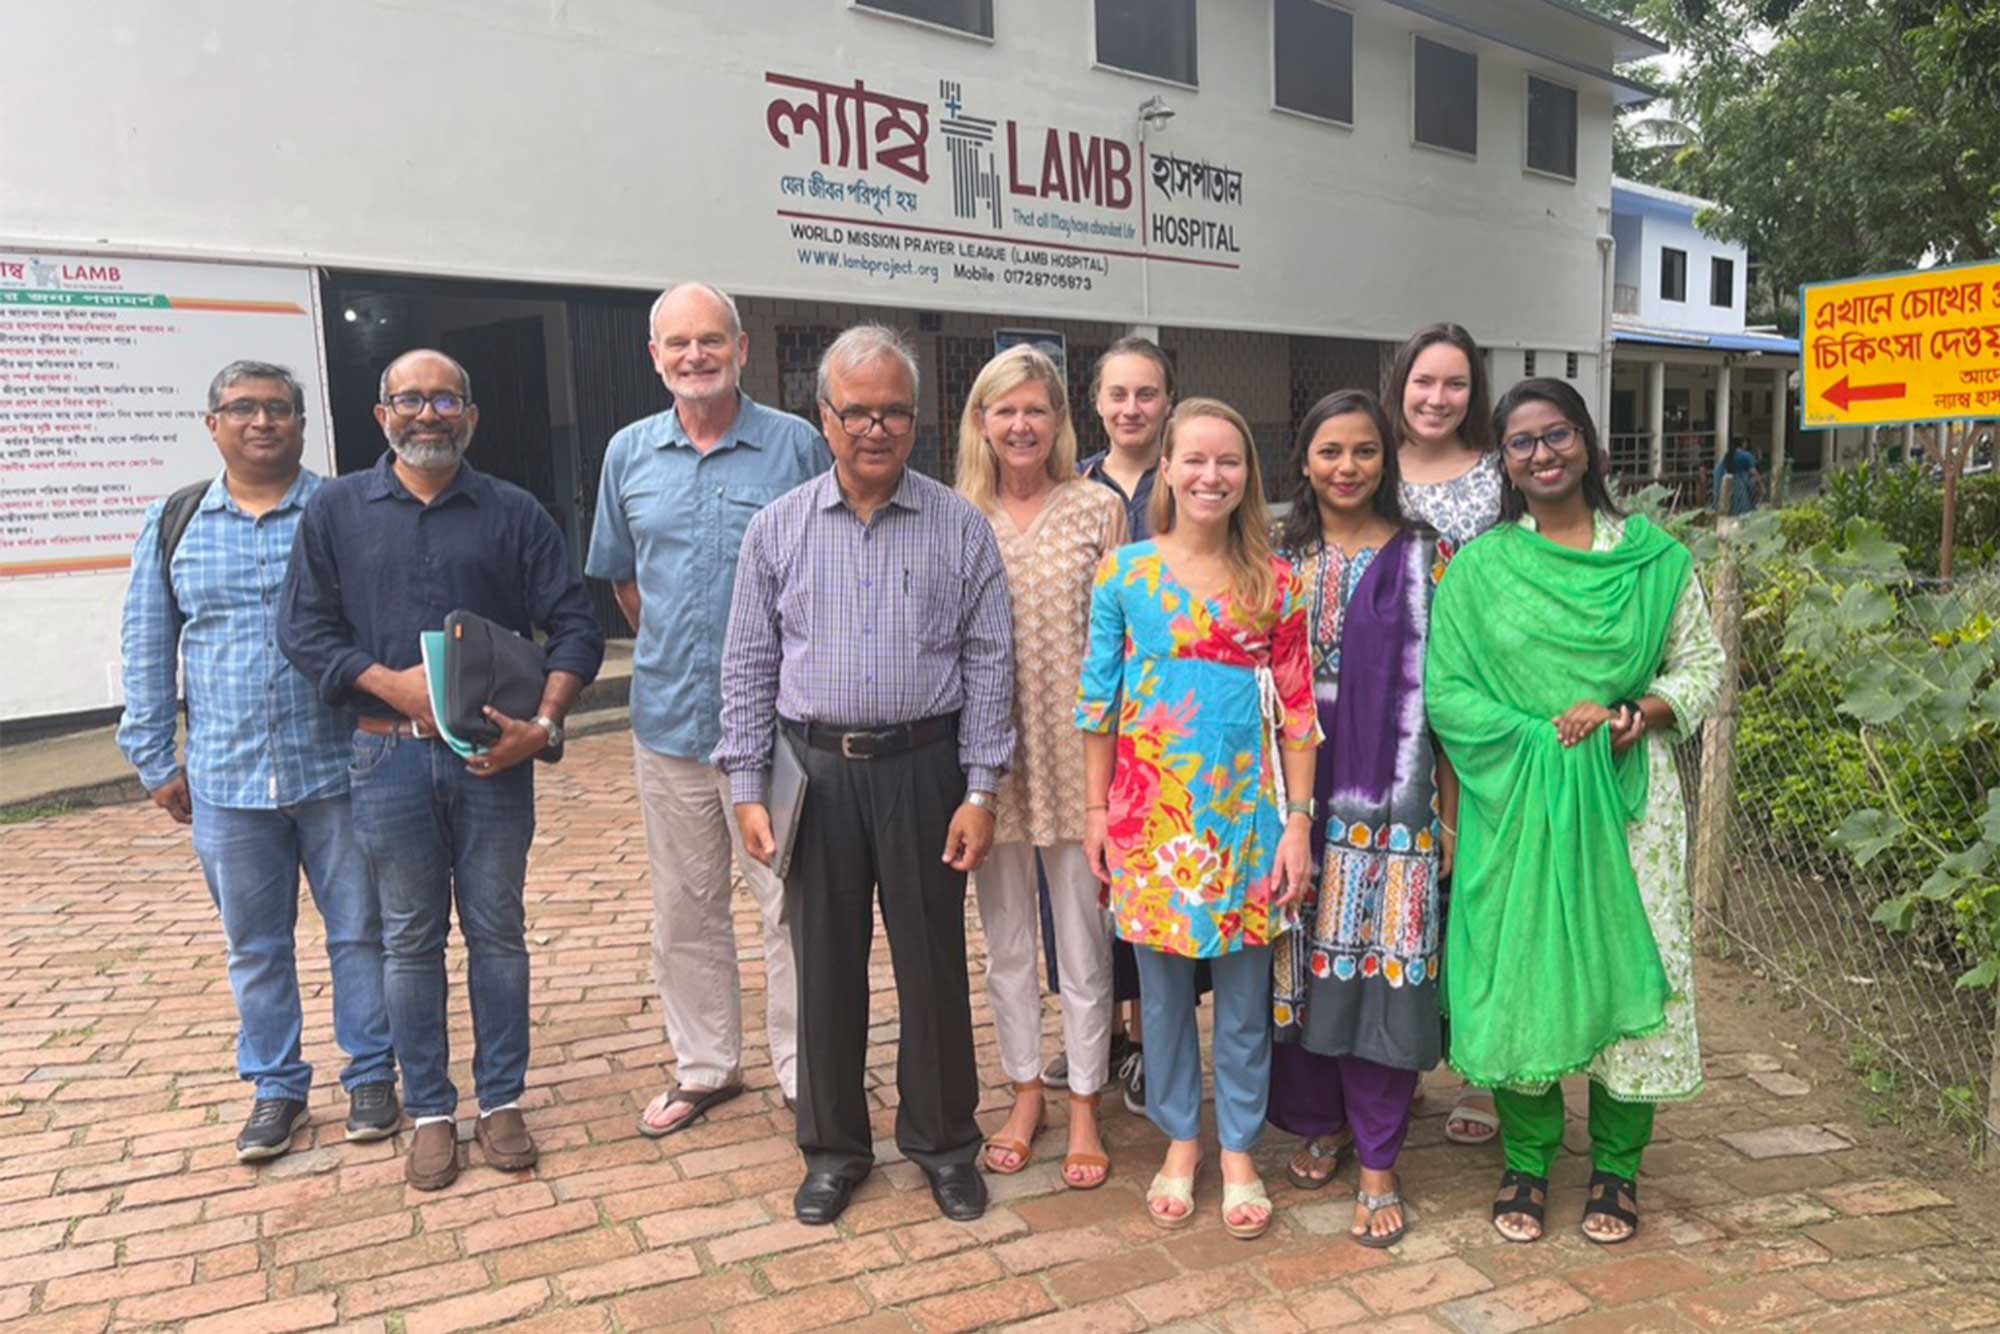 Group photo of Dr. William Petri and researchers standing outside a hospital in Bangladesh